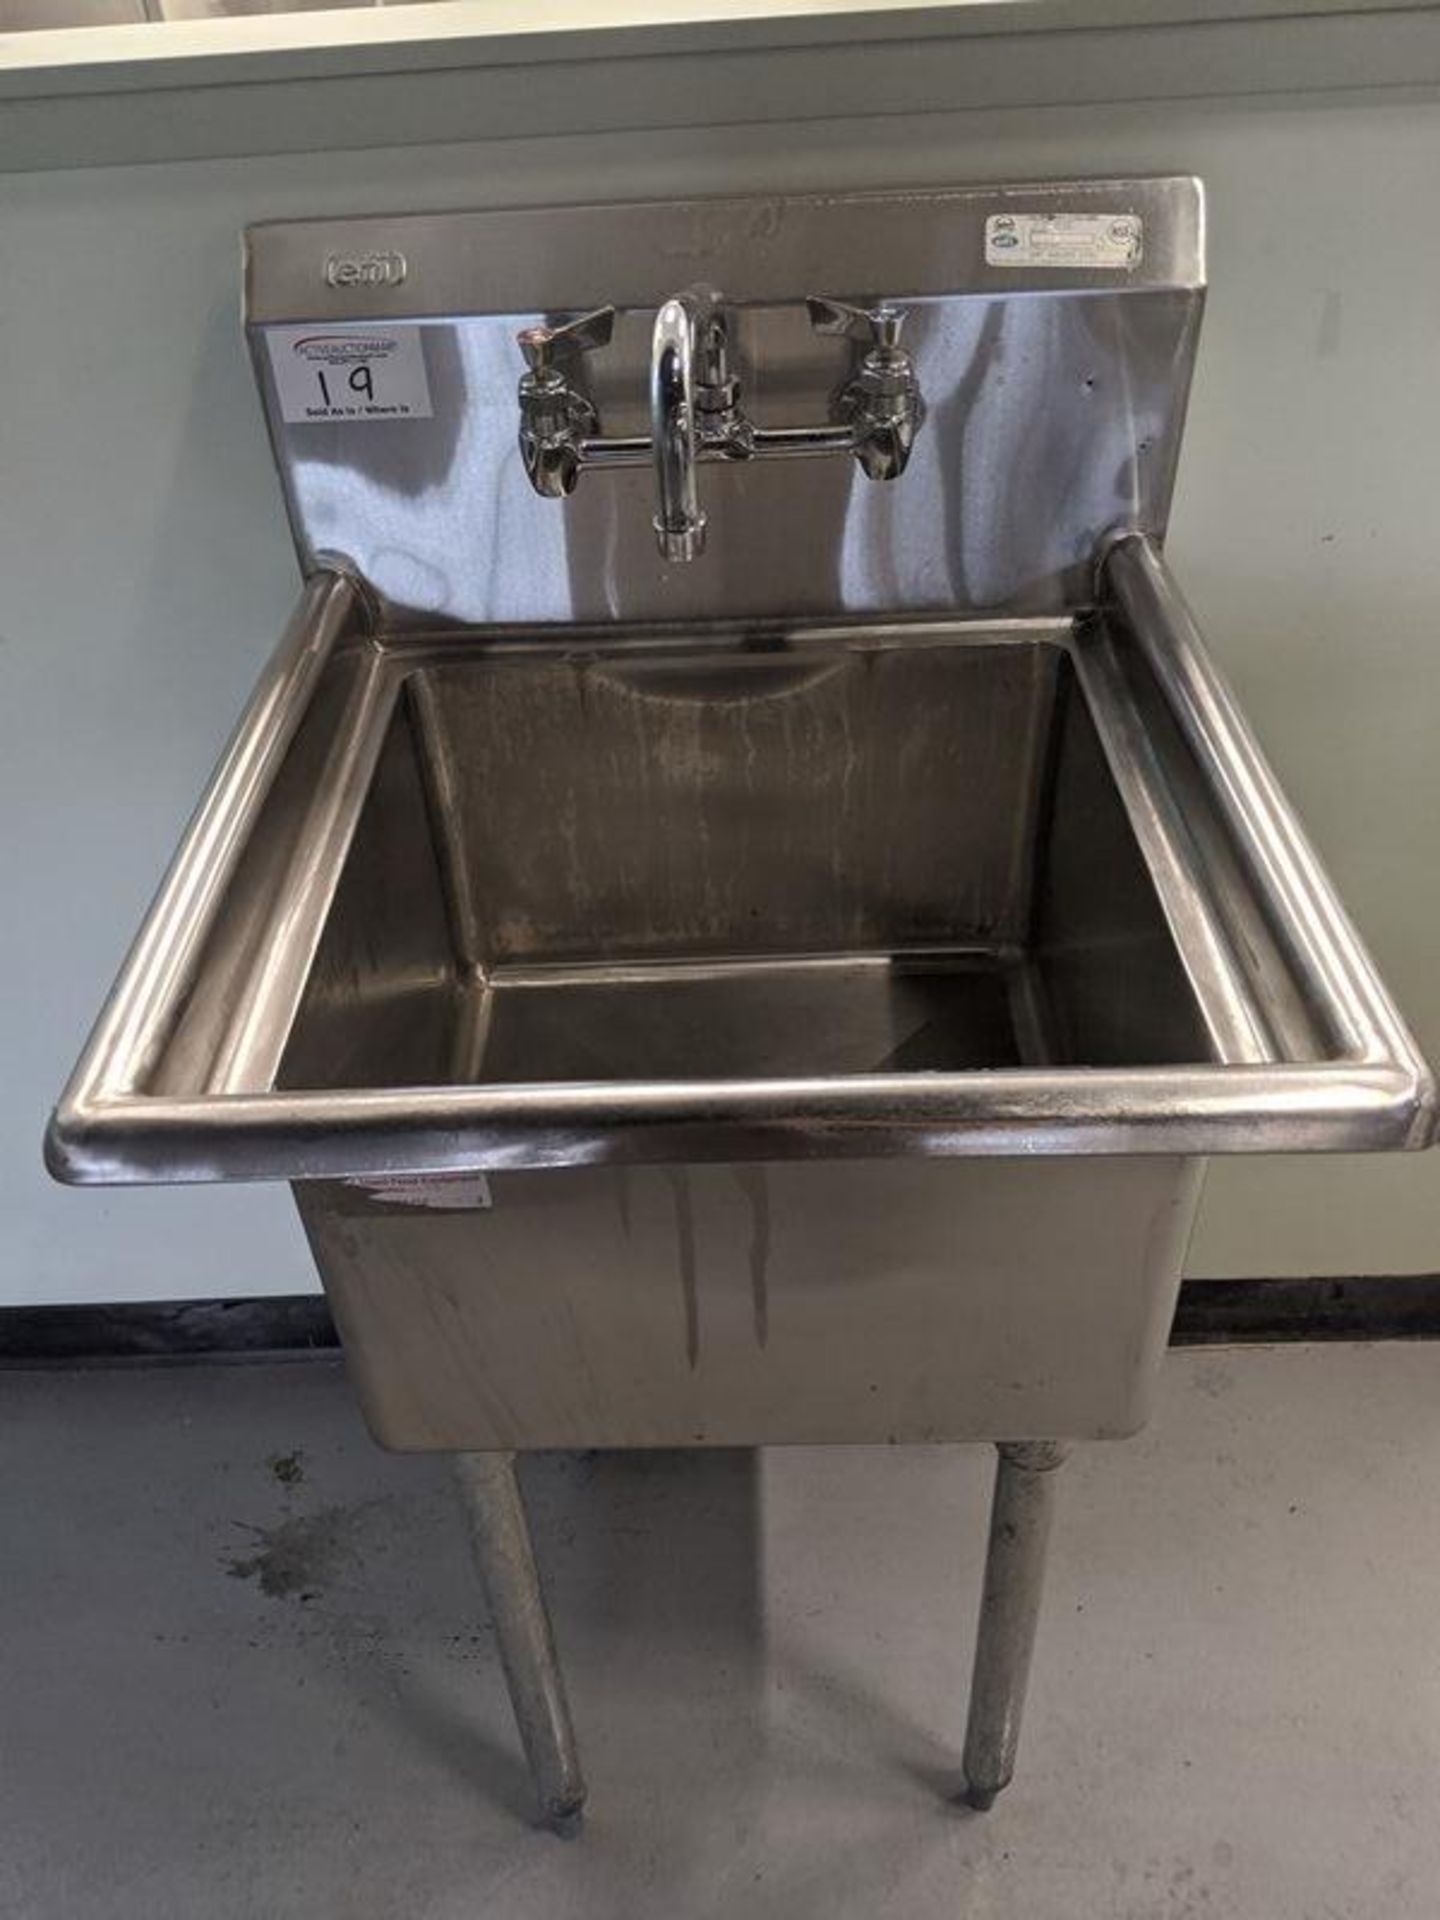 EFI Single Compartment Sink with Taps